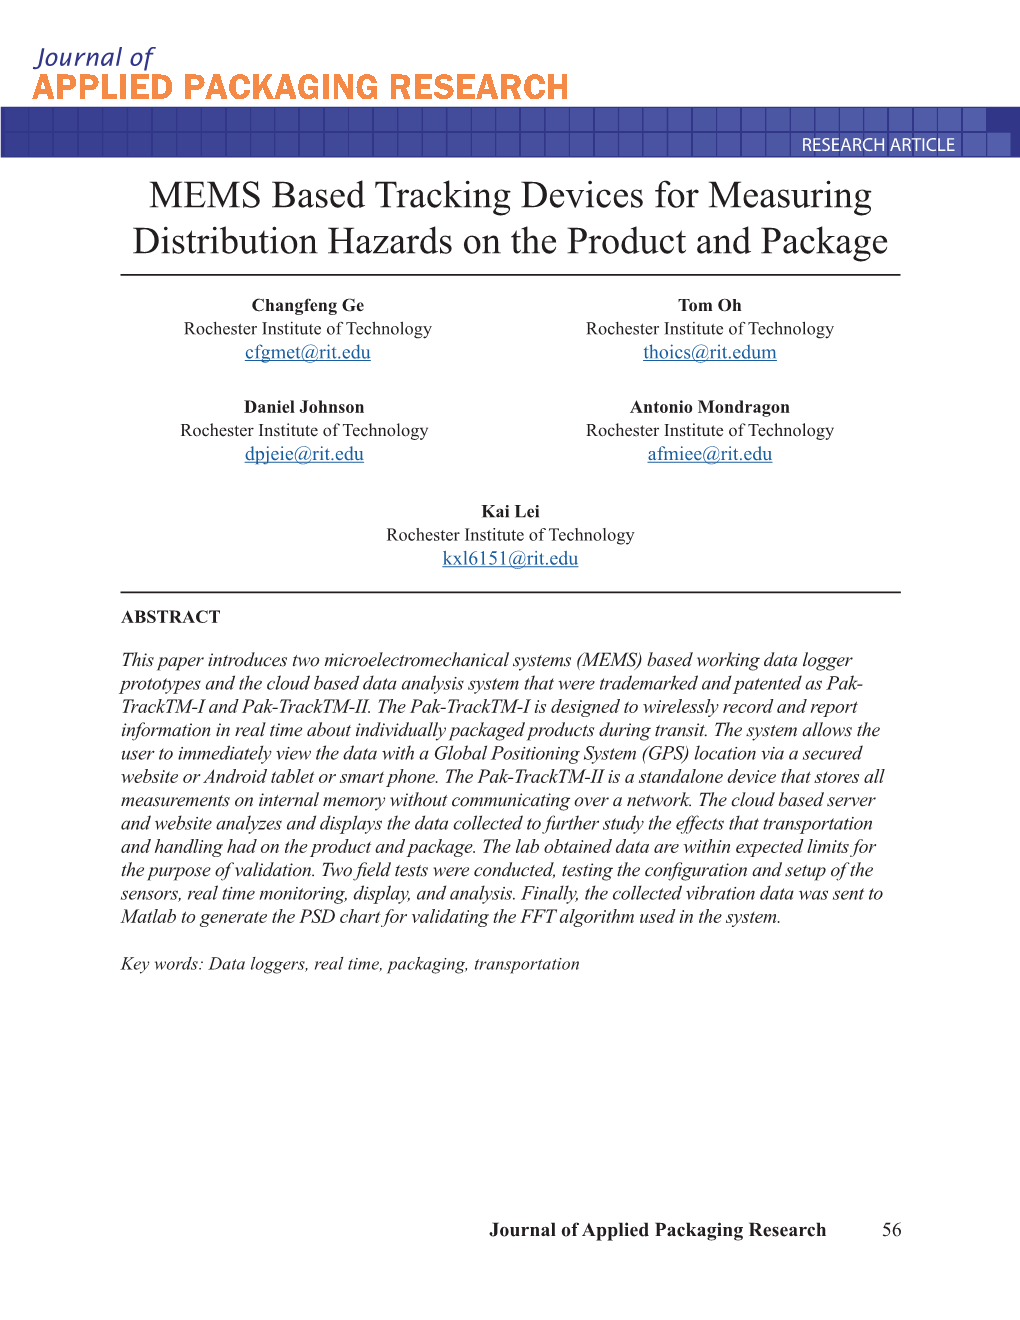 MEMS Based Tracking Devices for Measuring Distribution Hazards on the Product and Package